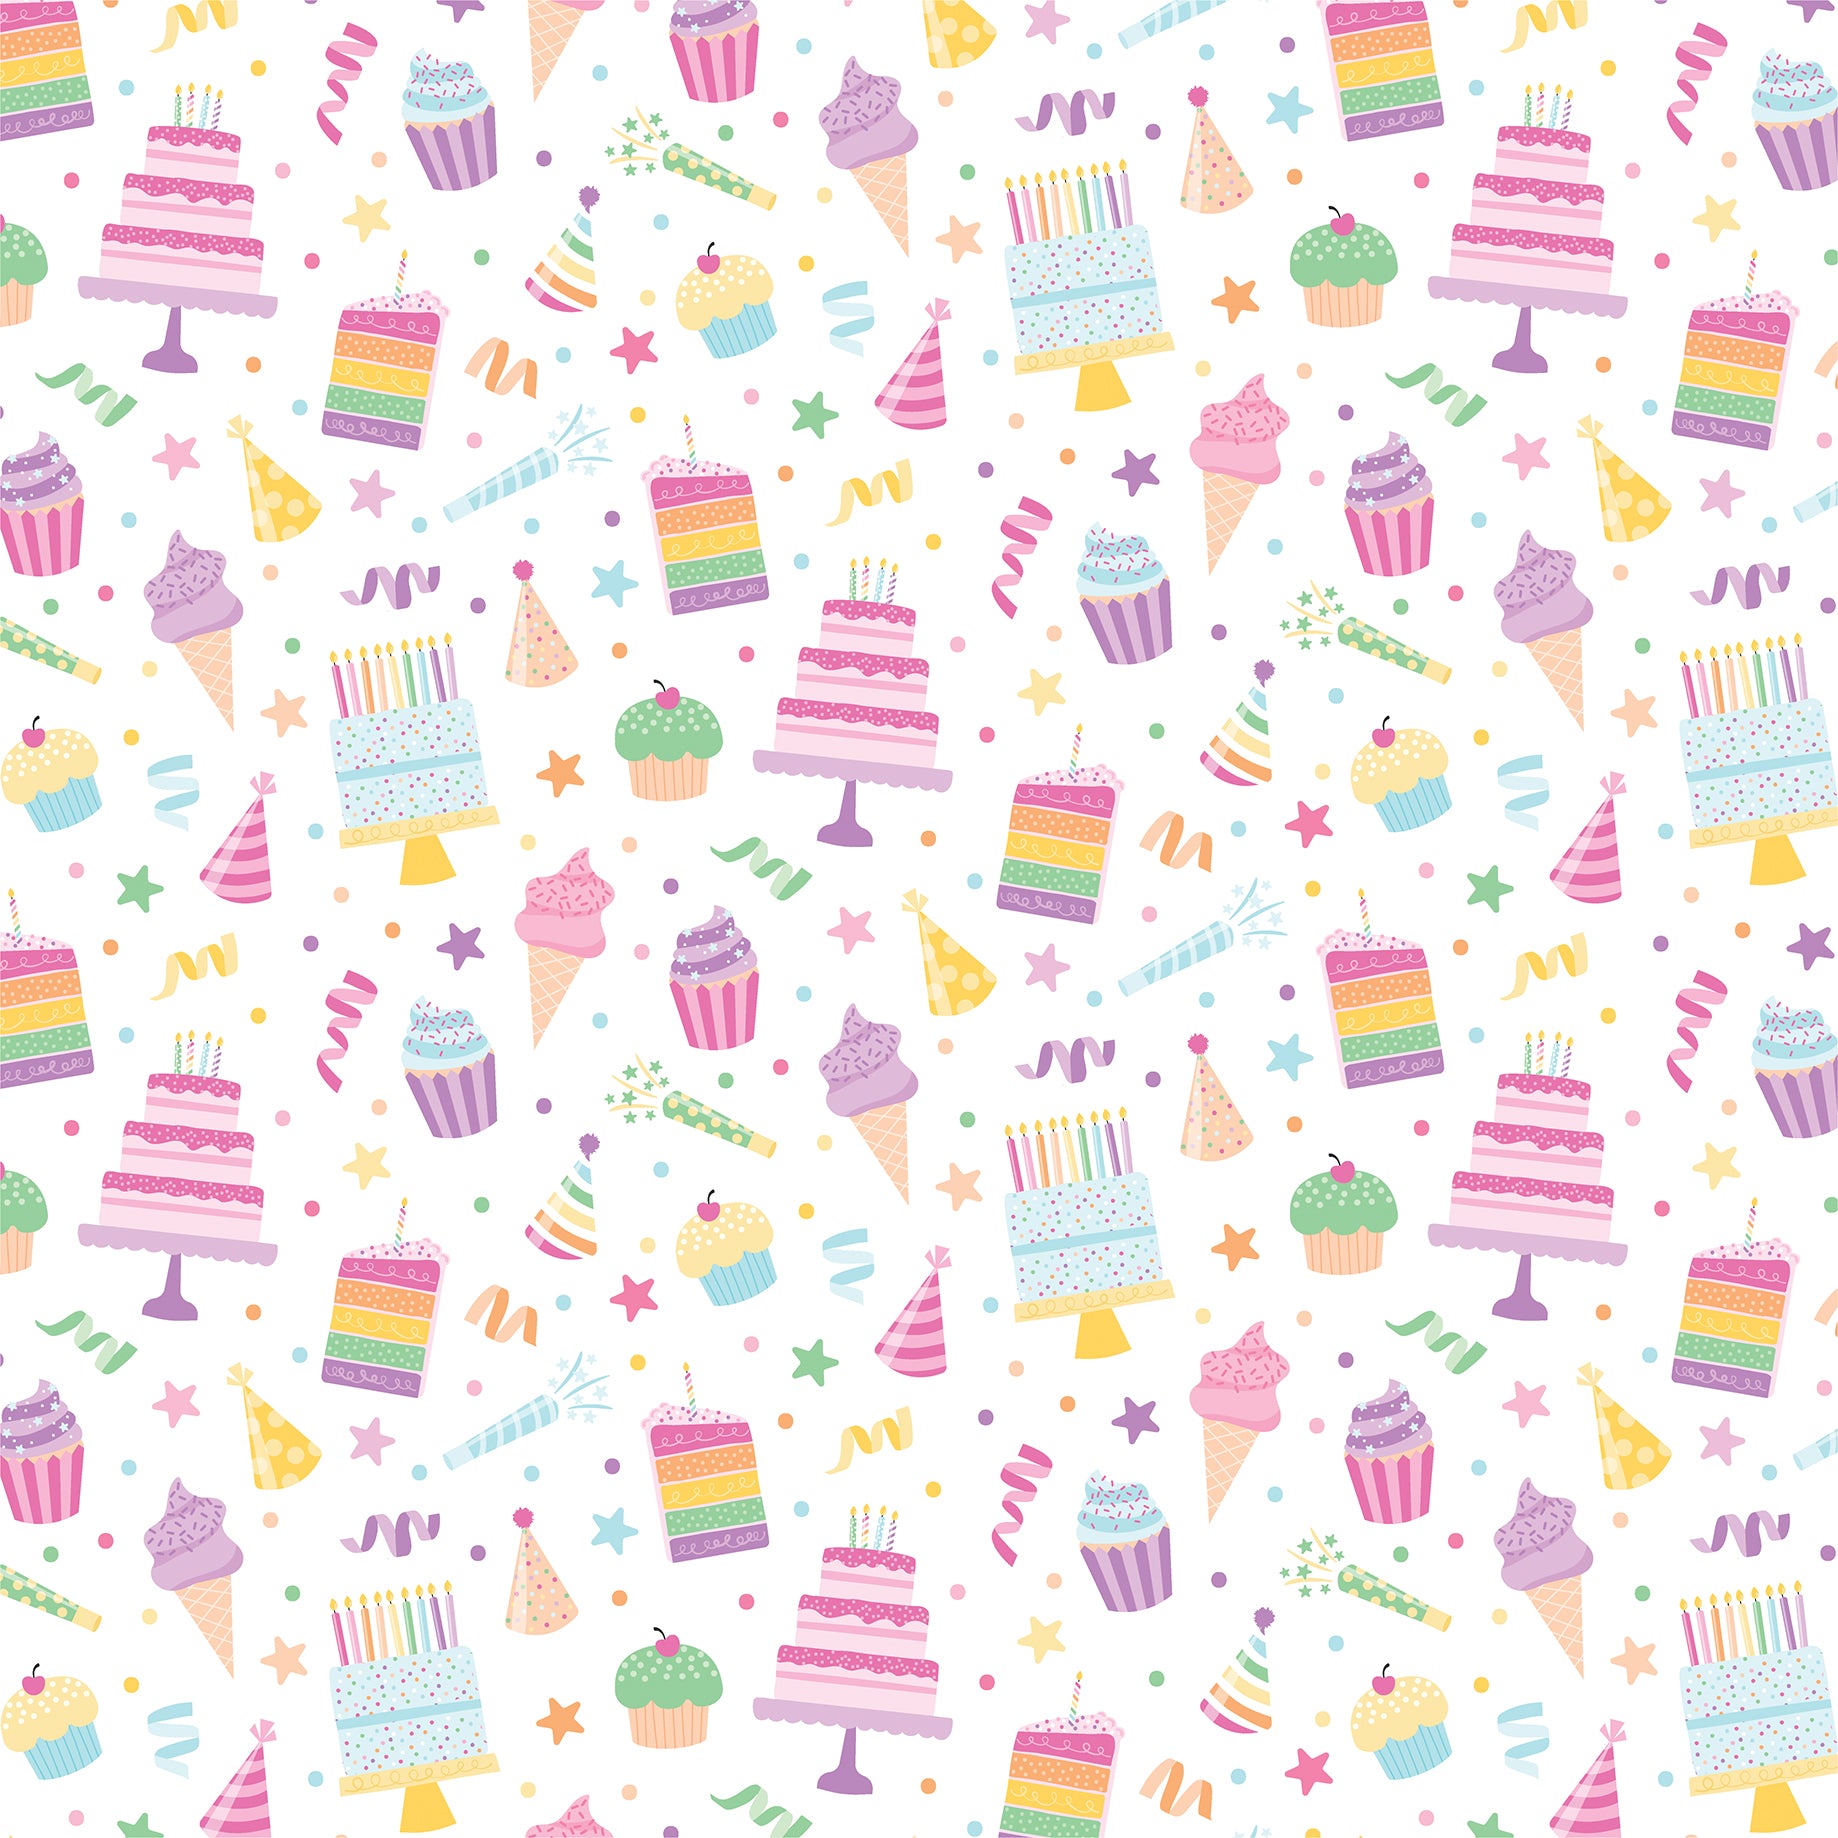 Make a Wish Birthday Girl Collection Let's Eat Cake 12 x 12 Double-Sided Scrapbook Paper by Echo Park Paper